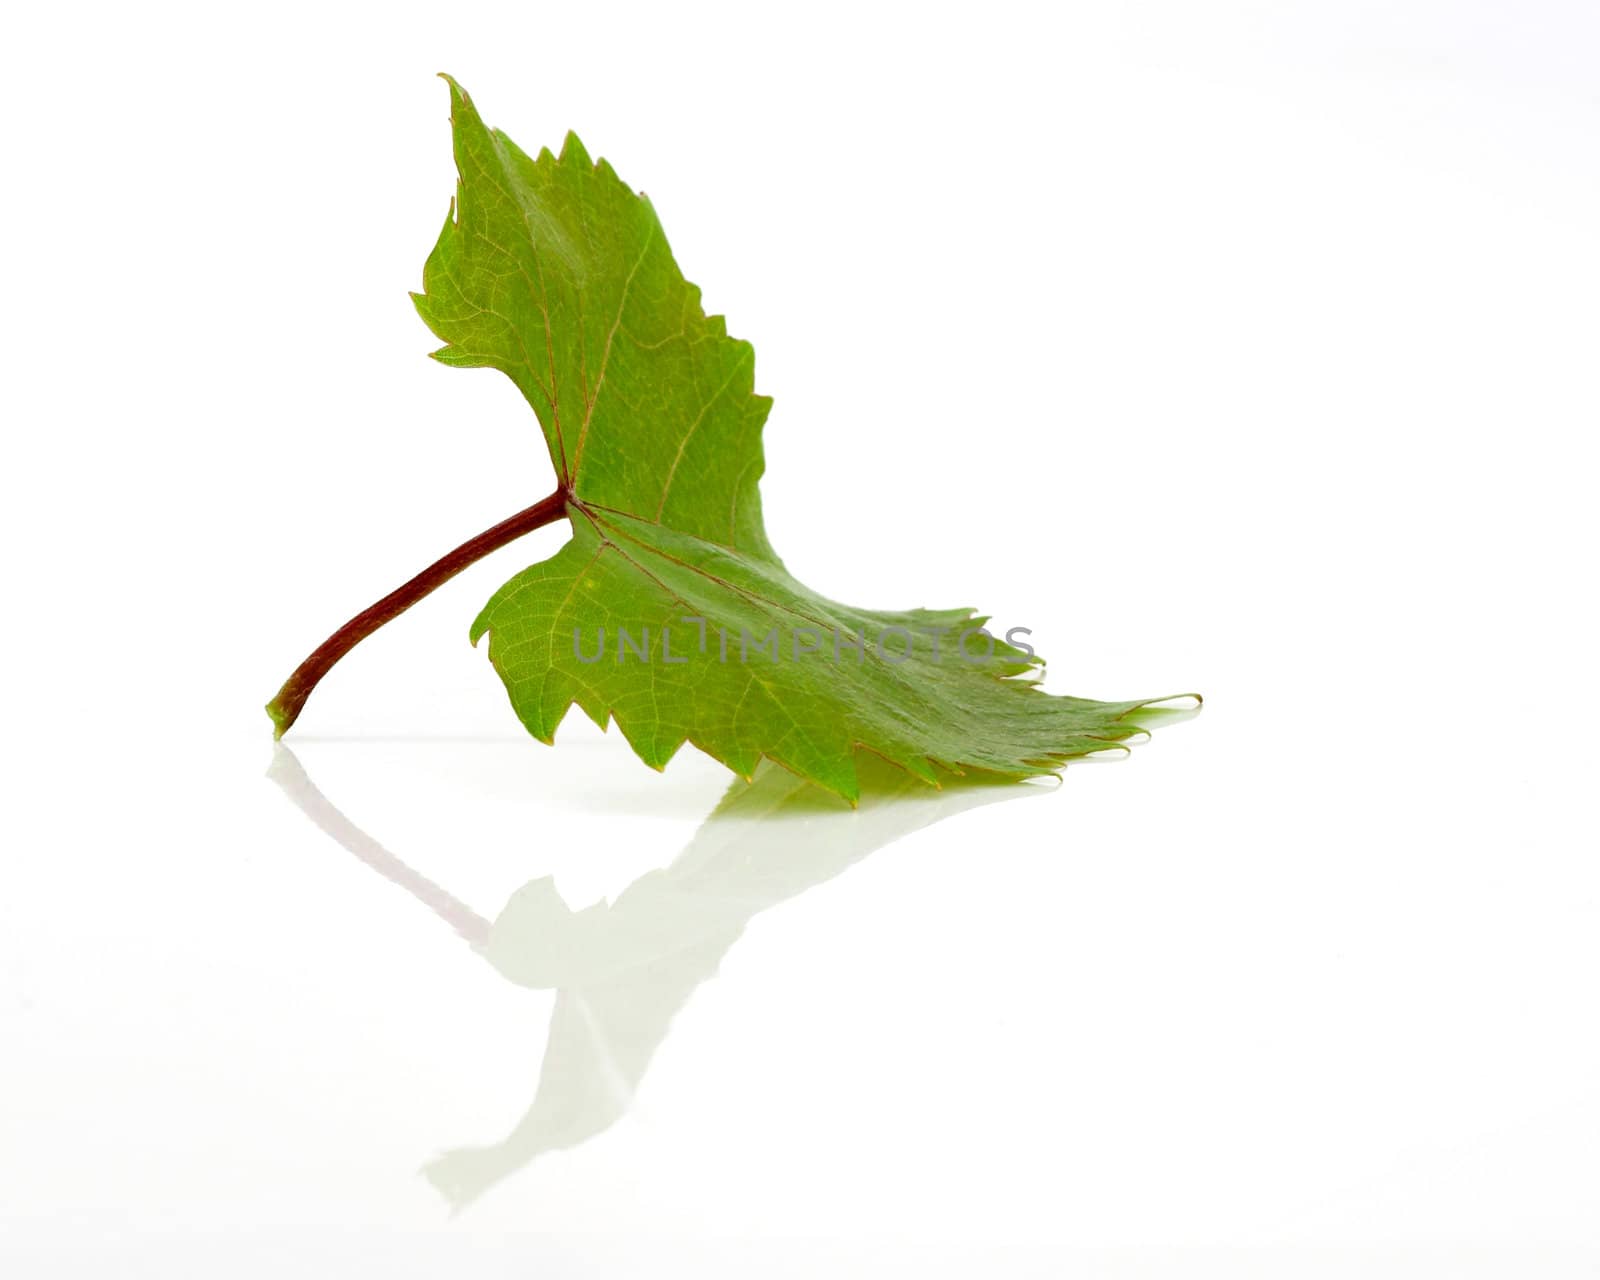 Green leaf in a white background with reflection by Iko